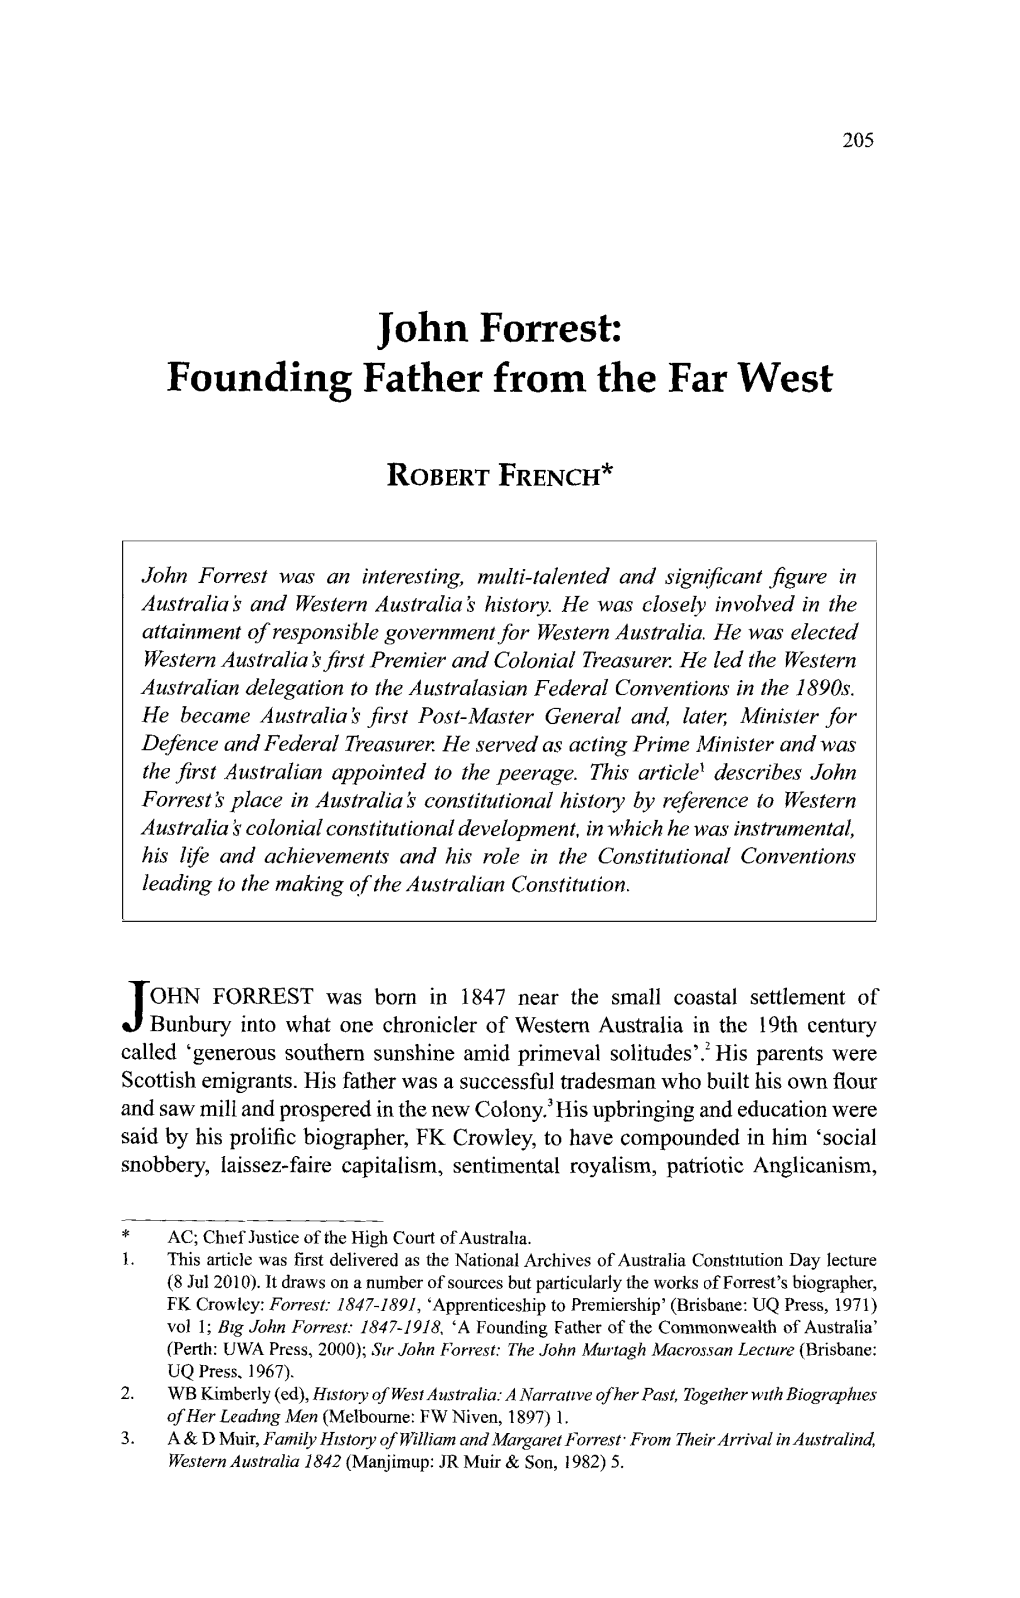 John Forrest: Founding Father from the Far West